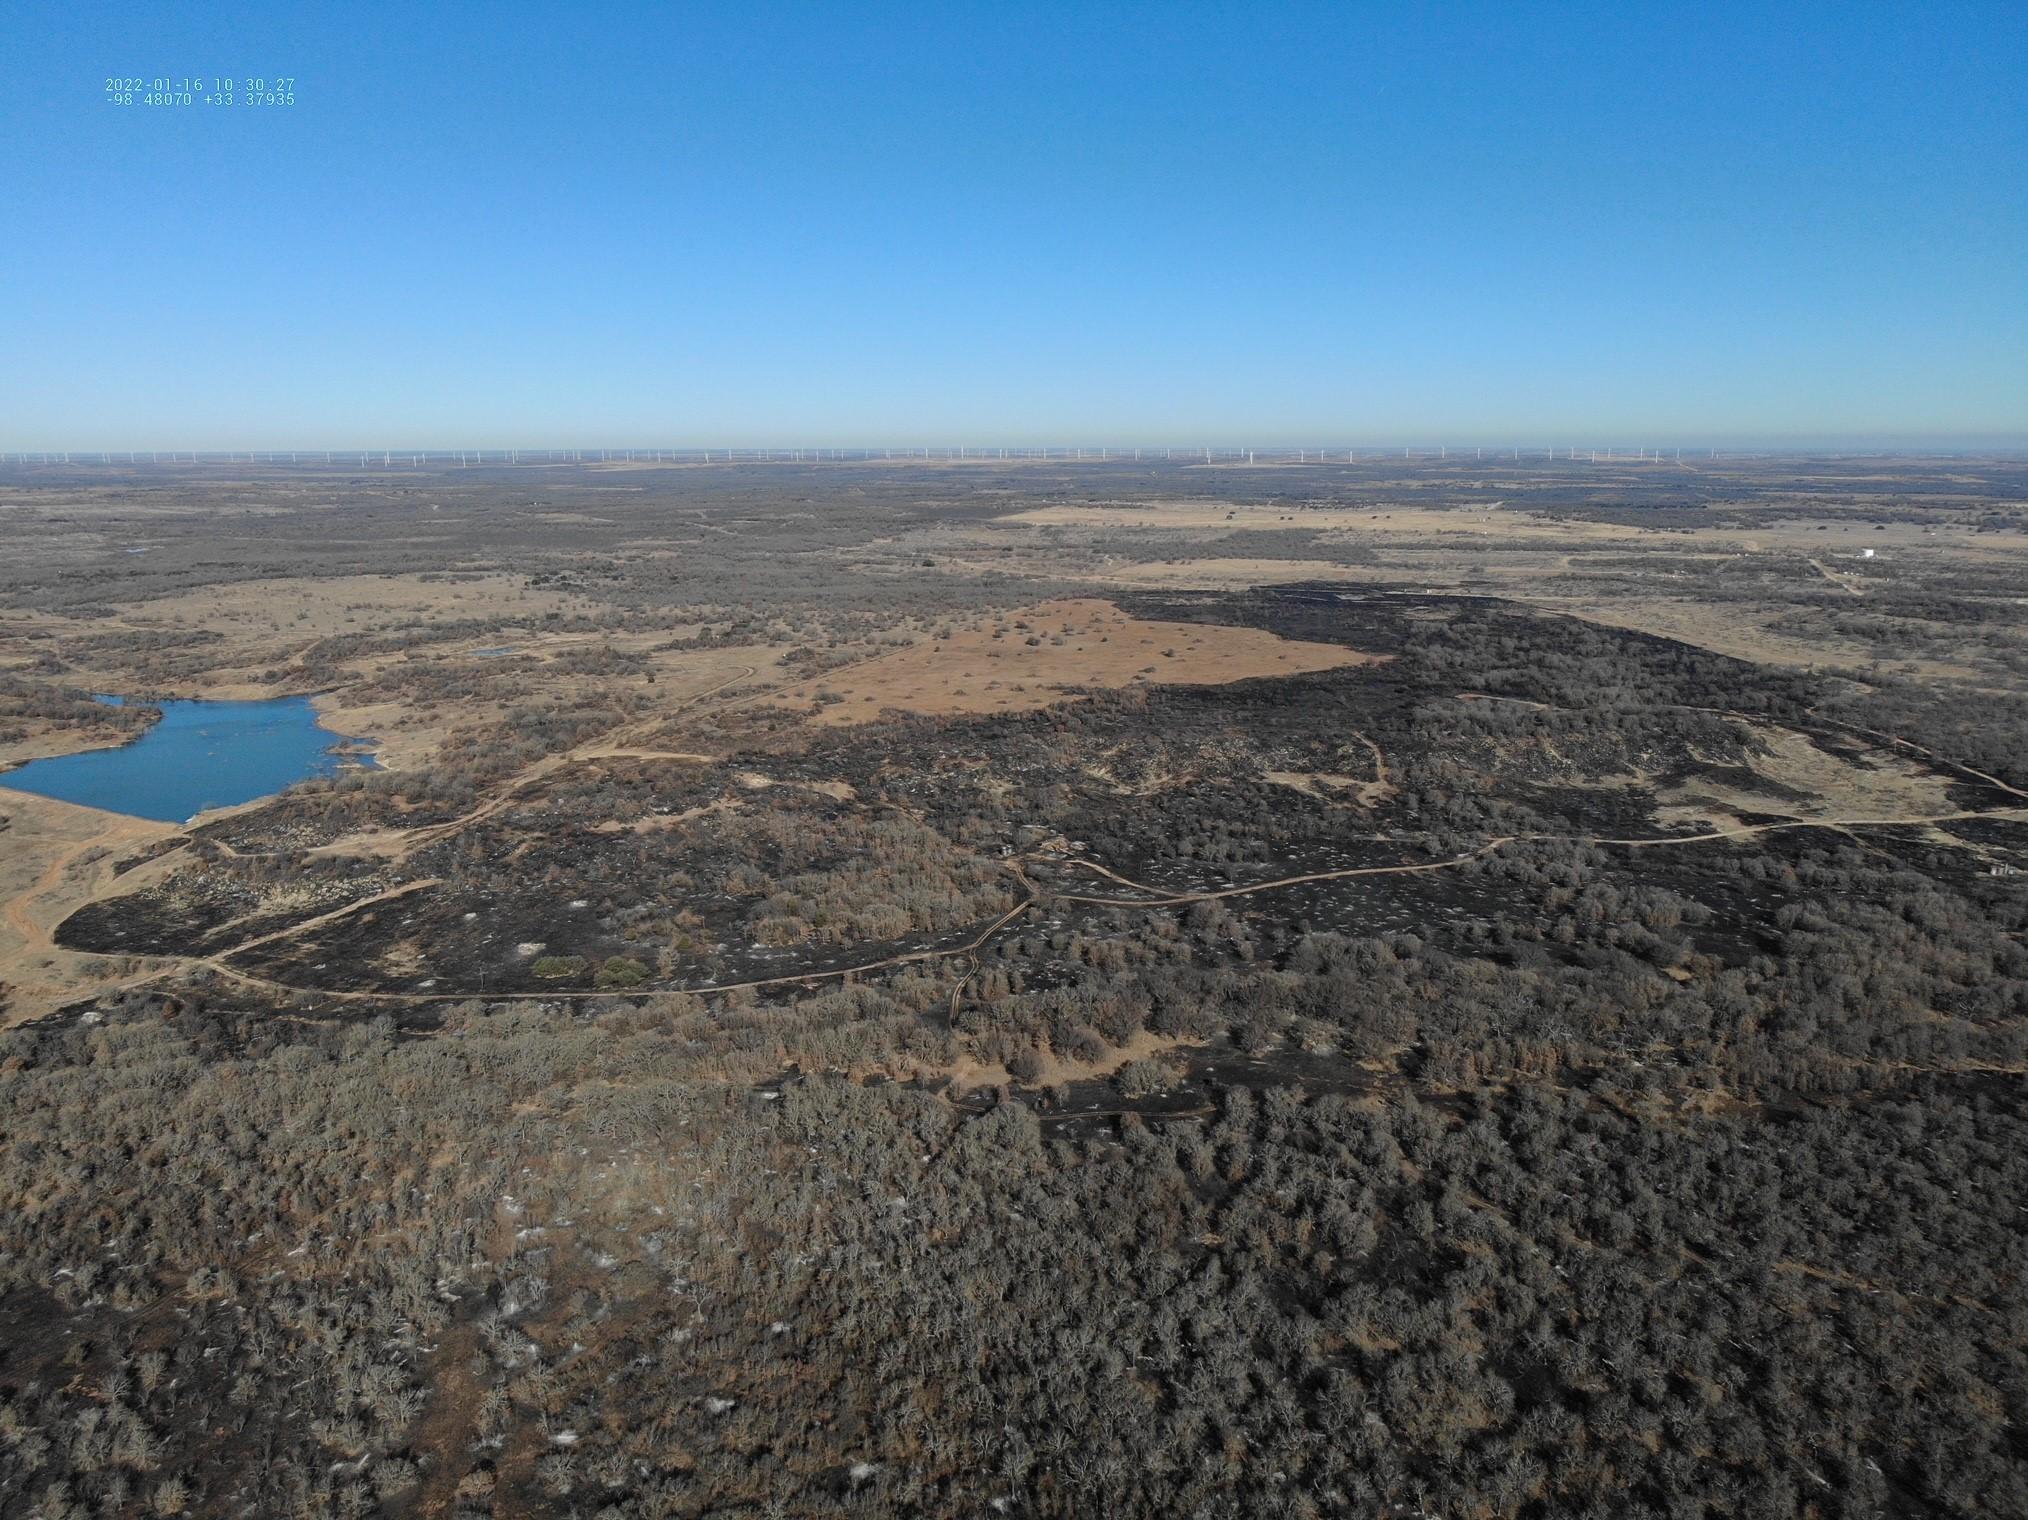 This image shows an aerial view of the burned vegetation 